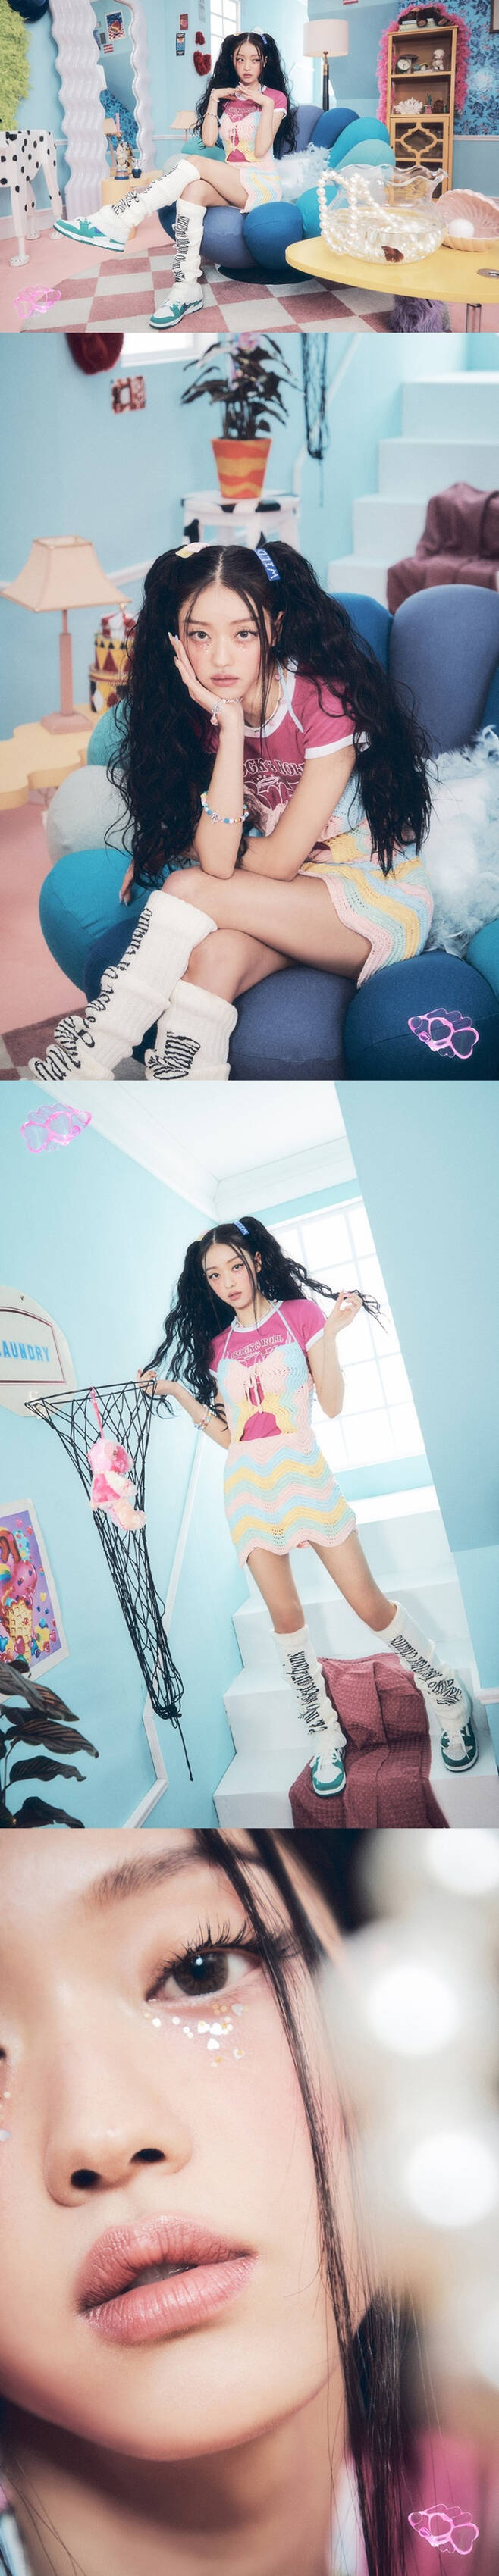 WM Entertainment, a subsidiary company, unveiled the concept photo of YooA Mini 2, SELFISH, which will be released on the 14th through official SNS on the 8th.In addition to the blue interior, shell-shaped sofas, pearl necklaces and fish in the aquarium, as well as details reminiscent of the water somewhere, further stimulated curiosity about this album concept.YooA made his unique unique color to the public with his unique intense and dreamy musical identity and unusual concept through his solo debut title Bon Voyage in 2020.Immediately after its release, it recorded the top spot in the domestic major music charts, including the first place, and won the first place in music broadcasting, and achieved remarkable results in terms of grades.